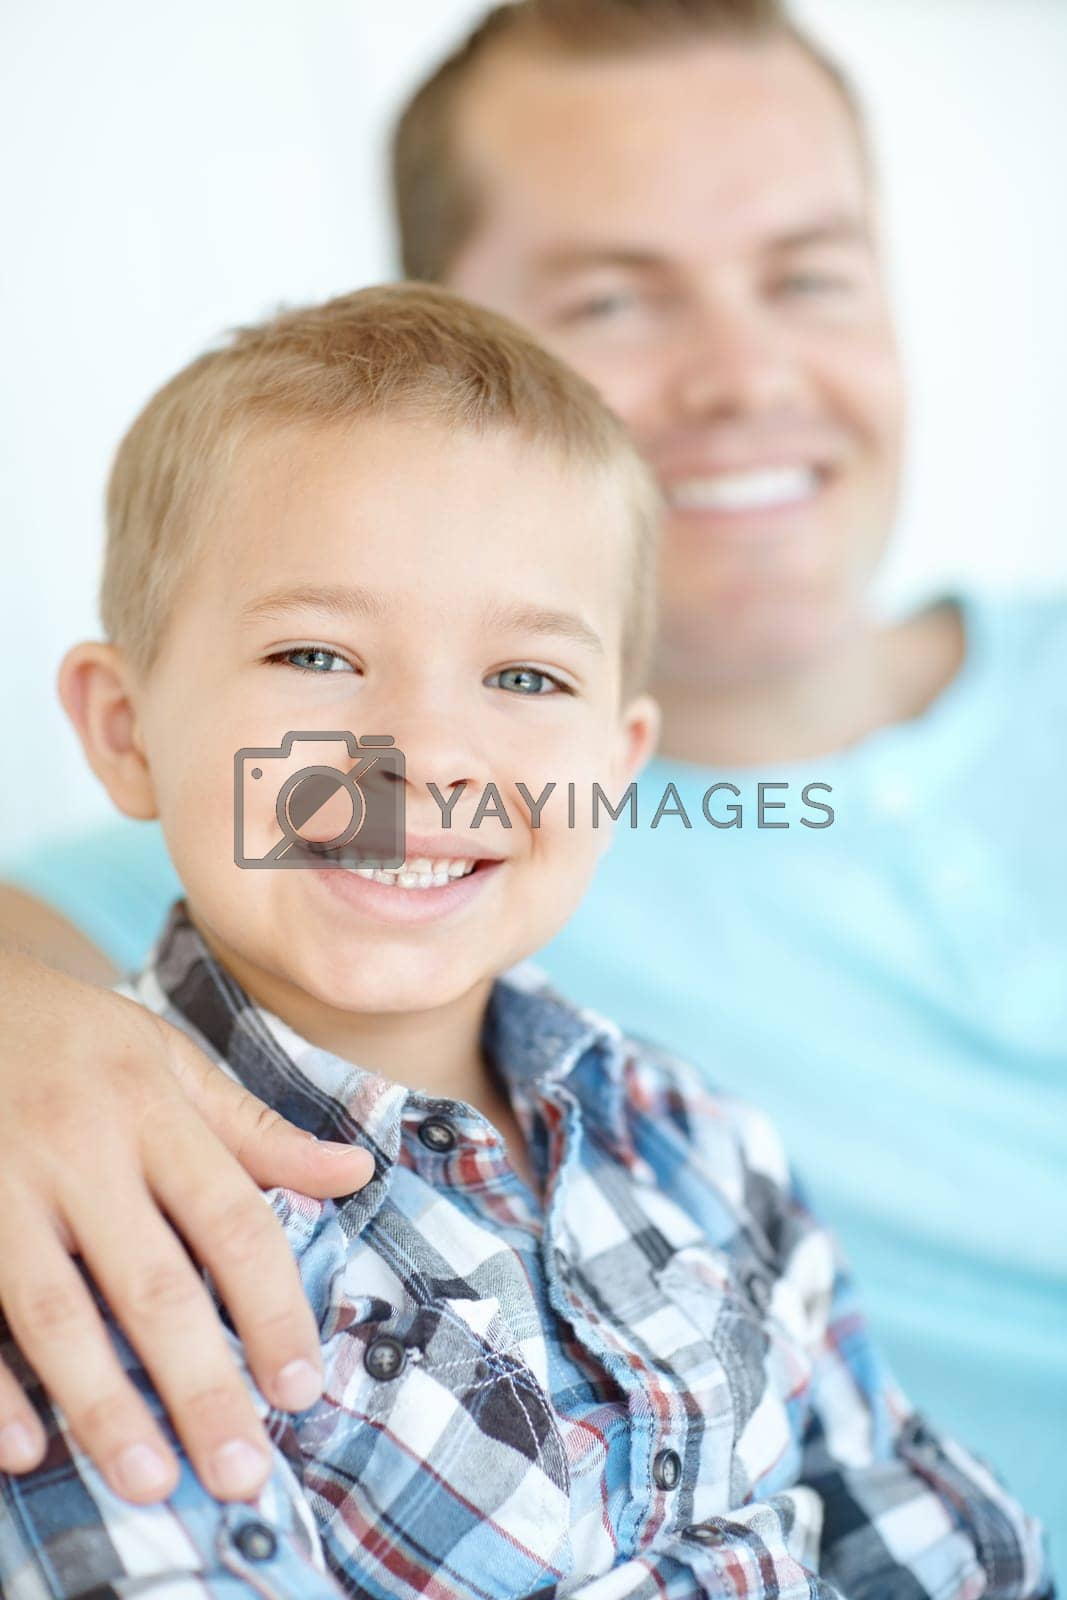 Royalty free image of Hes my best friend. Cropped portrait of a cute young boy sitting together with his dad at home. by YuriArcurs